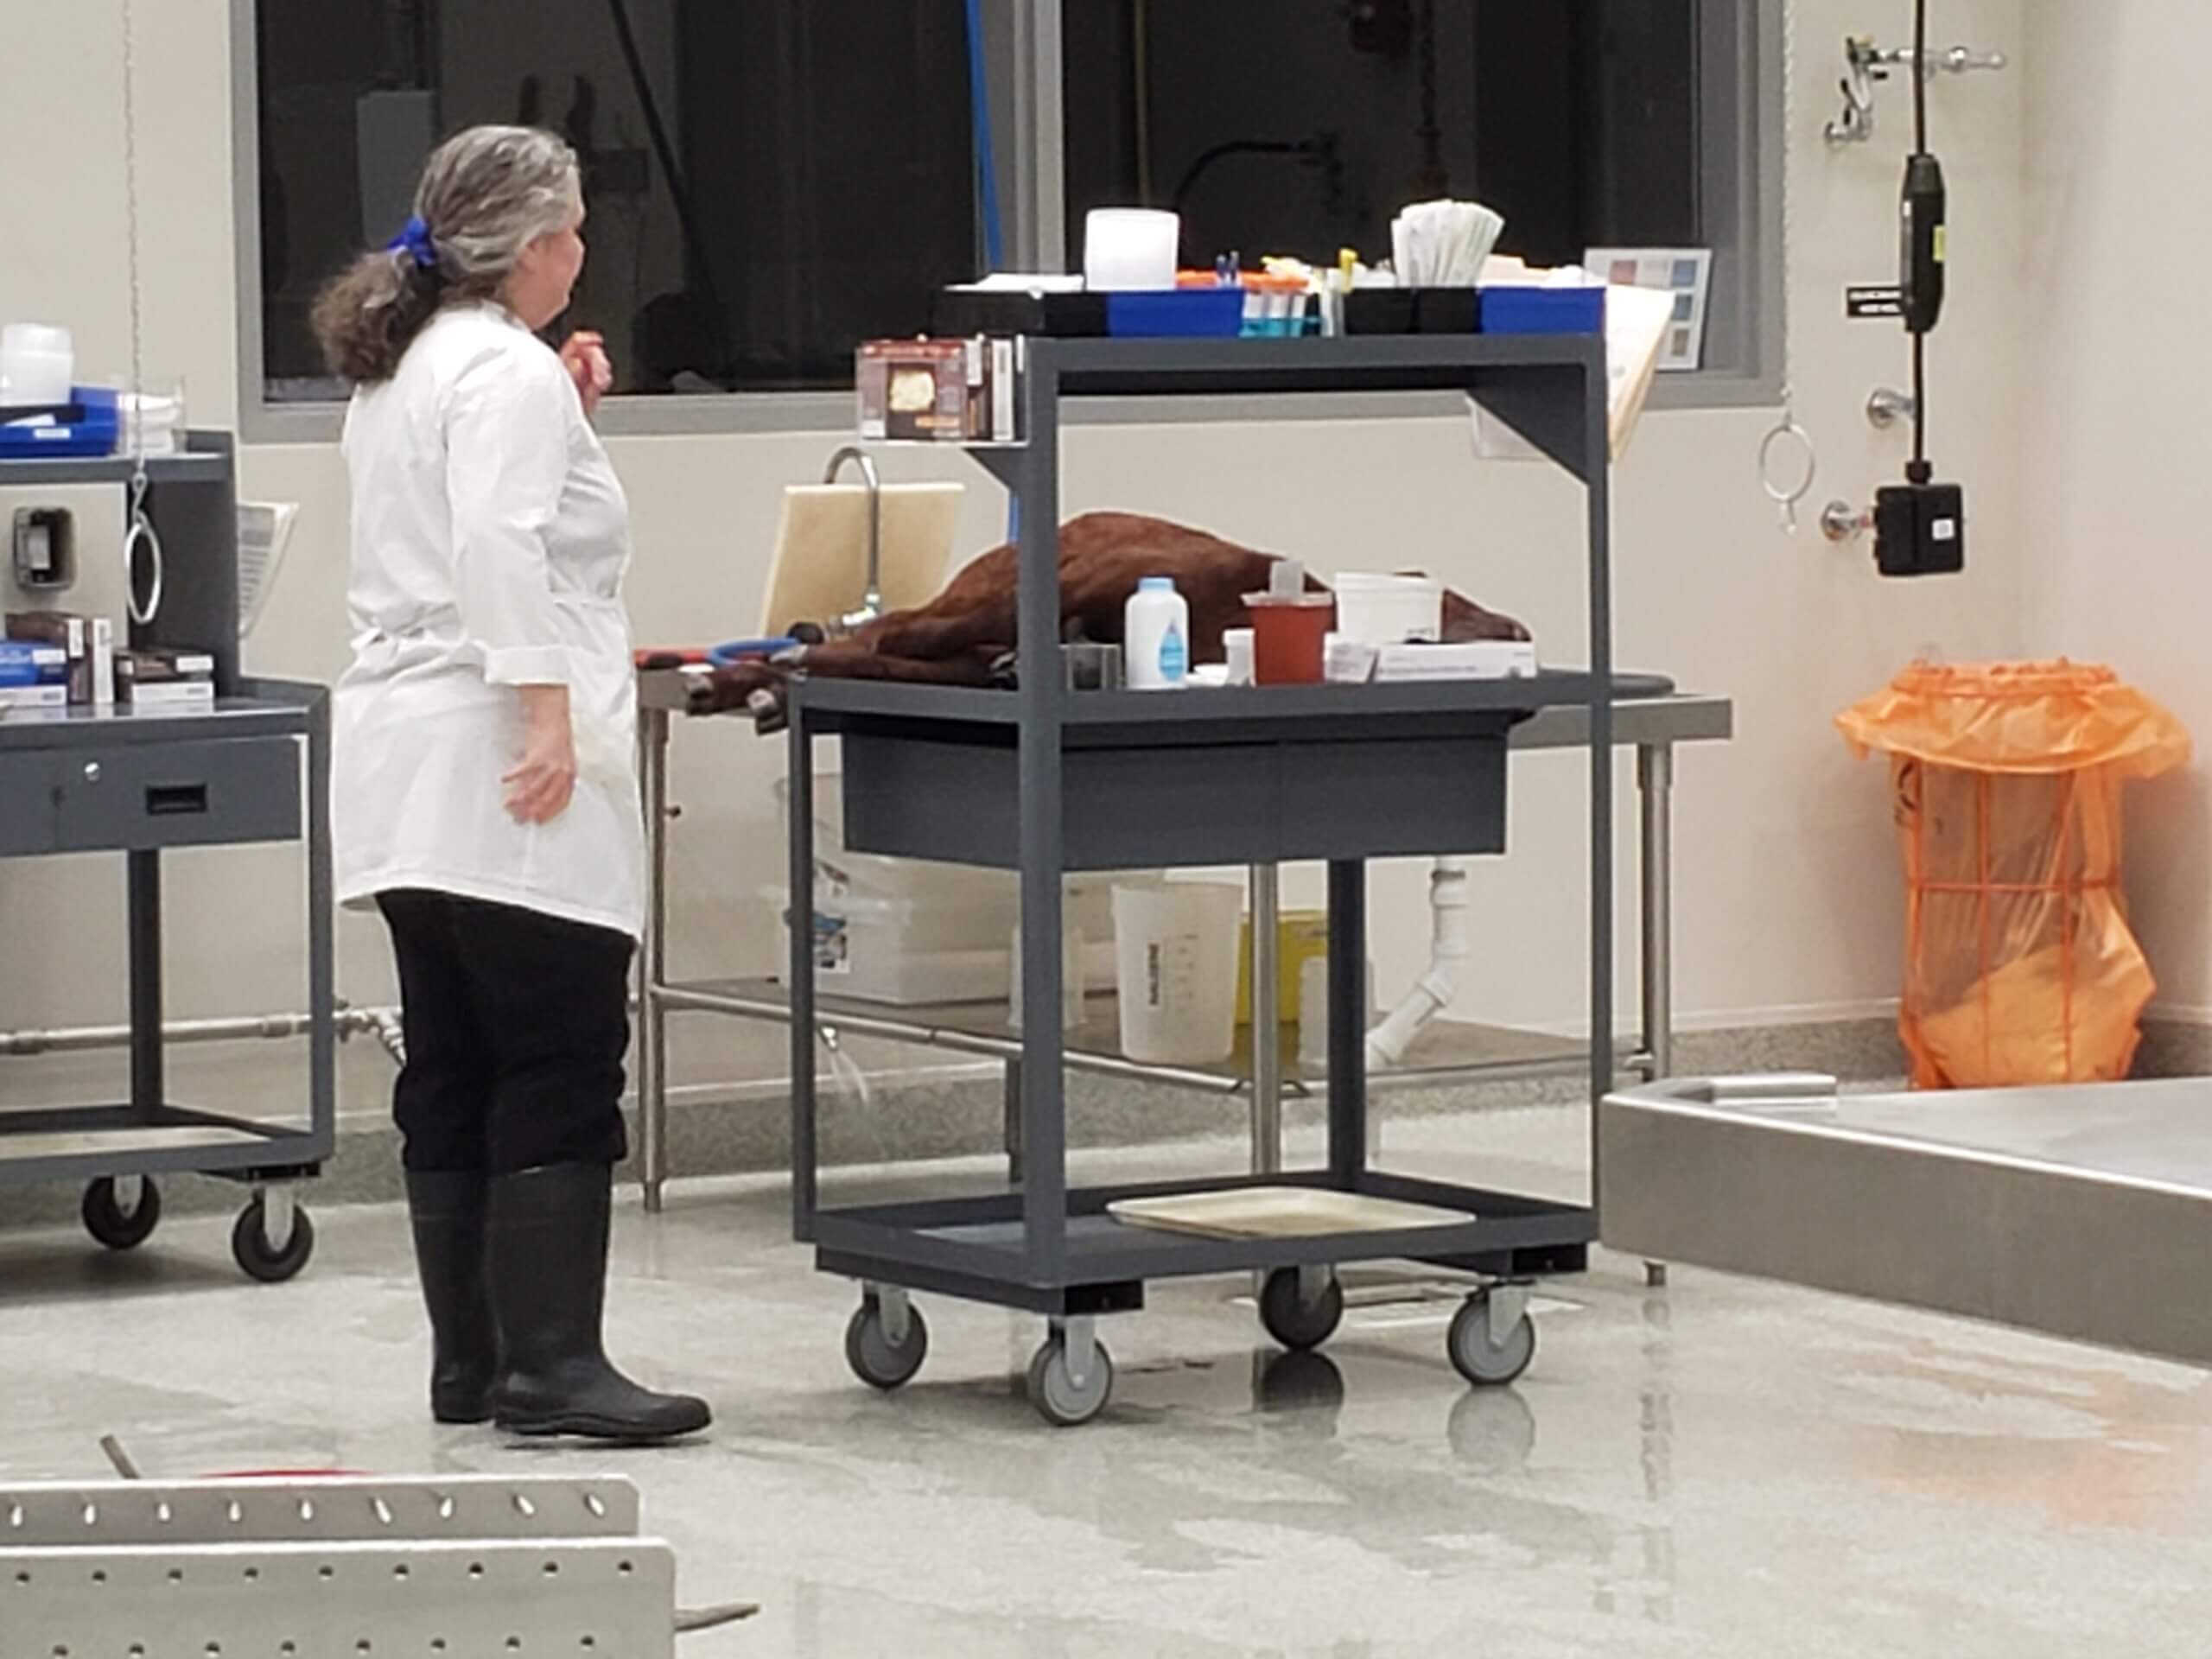 Image from inside animal necropsy lab.